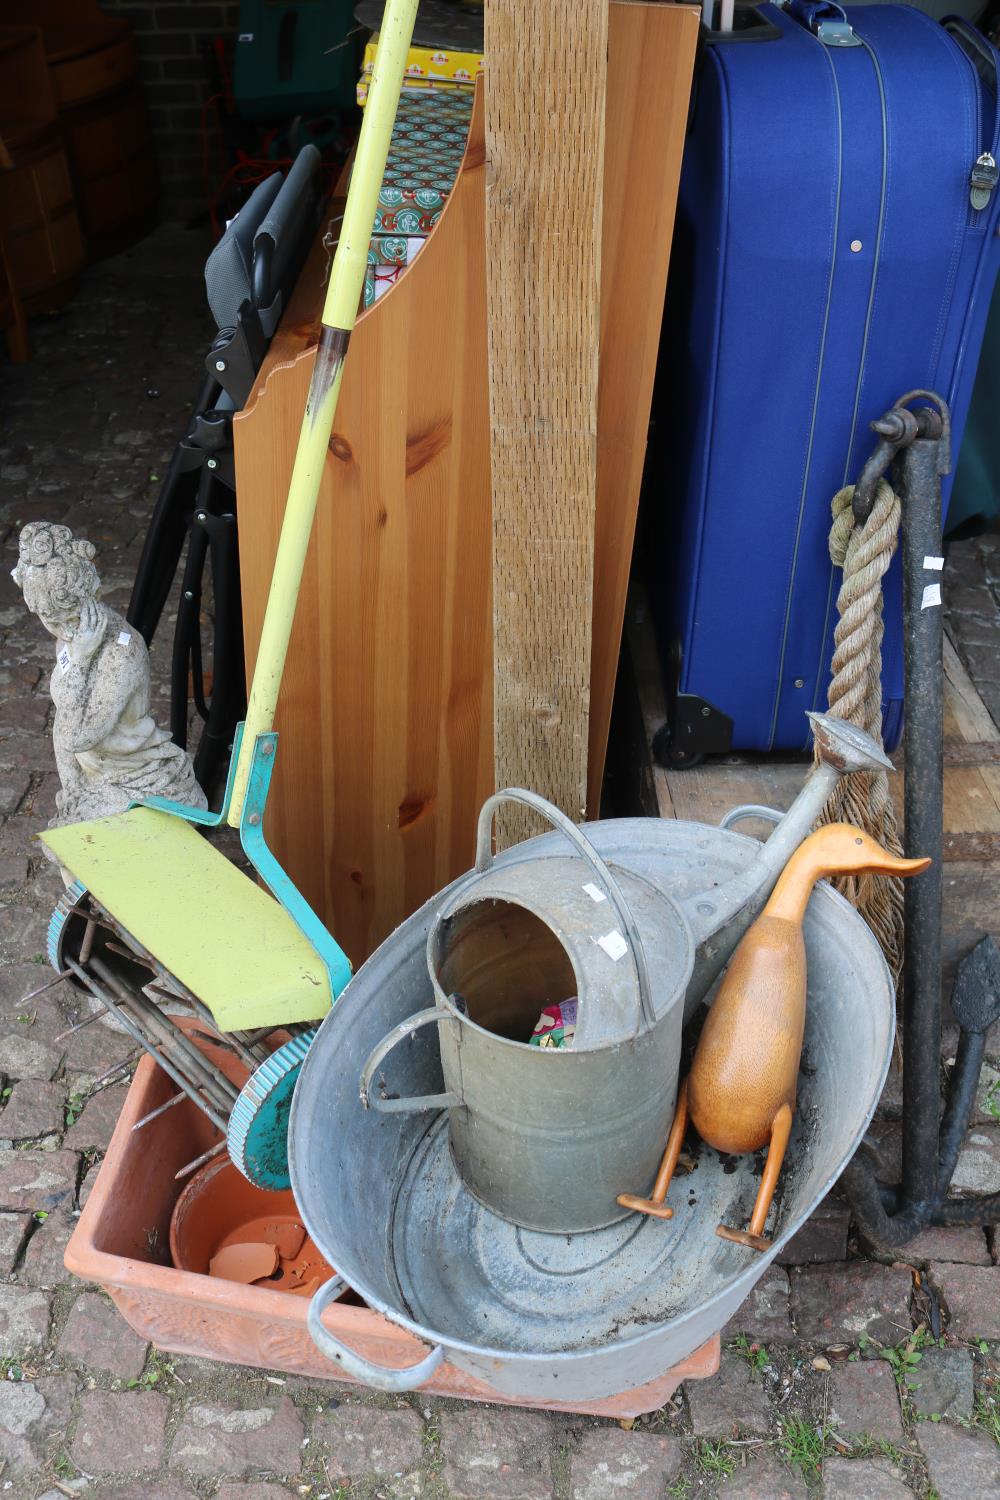 Terracotta Plater, Galvanised Oval wash bucket with Watering Can, Wooden Duck and a Lawn Aerator